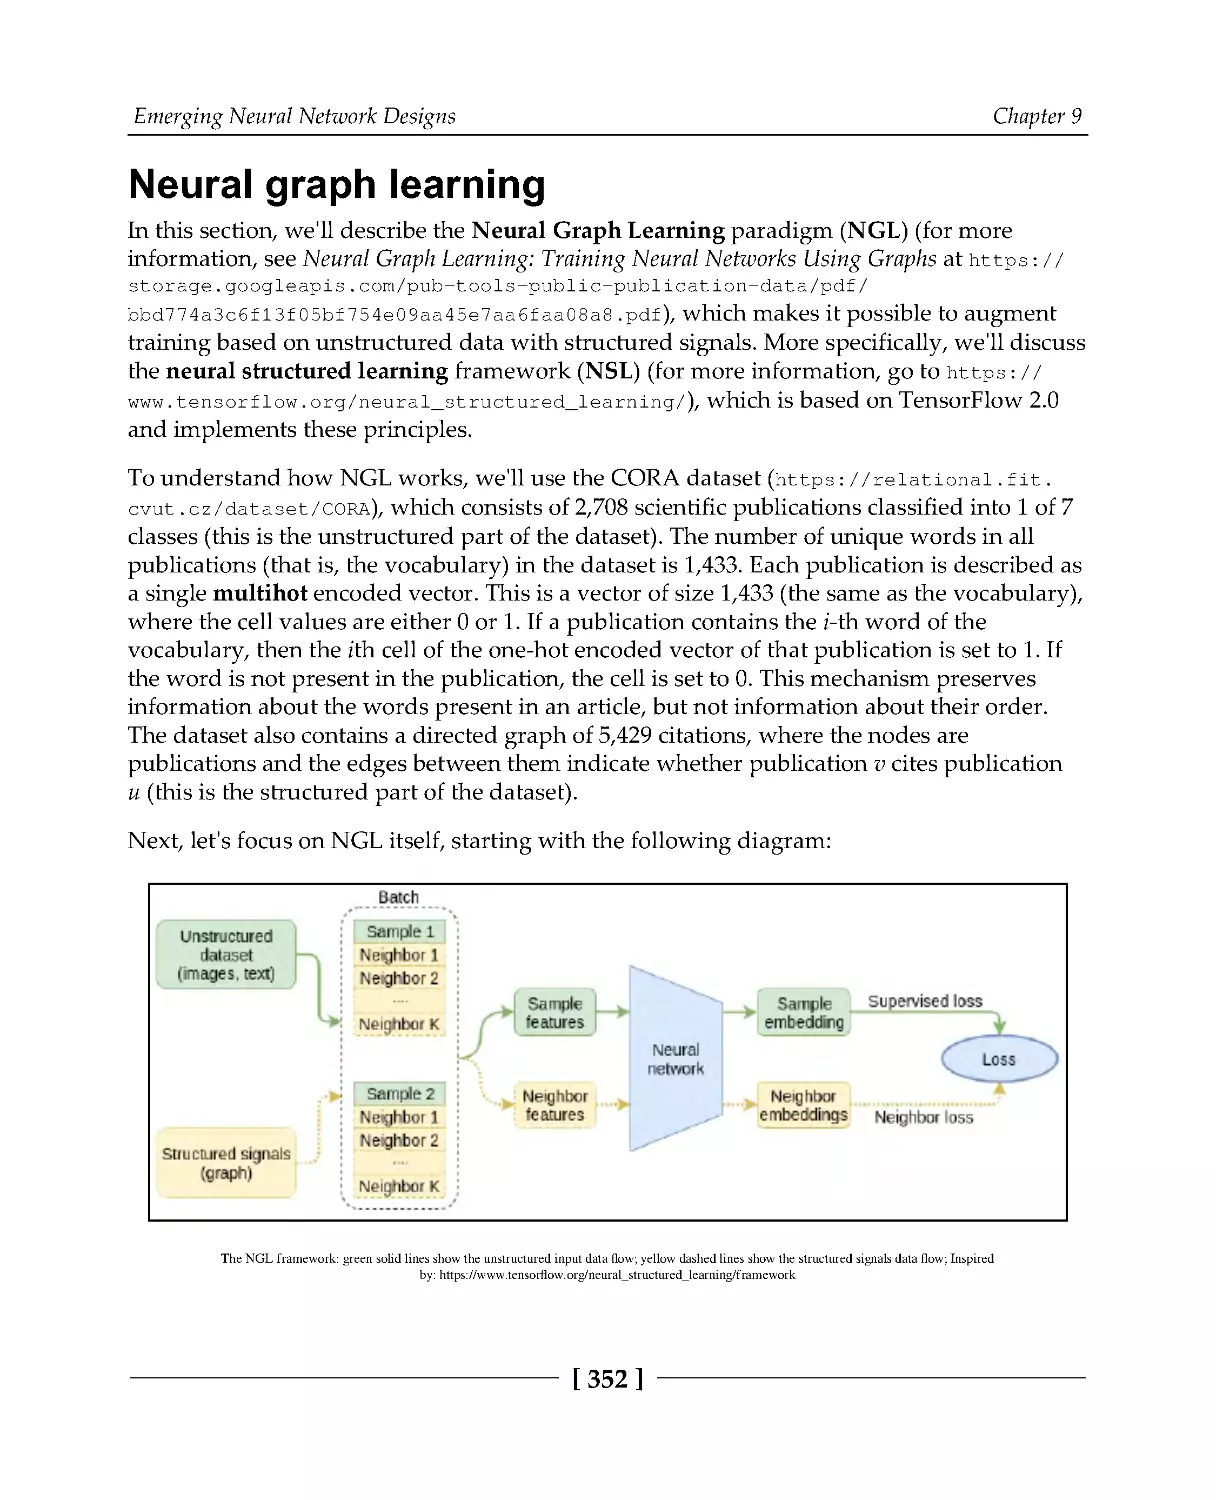 Neural graph learning